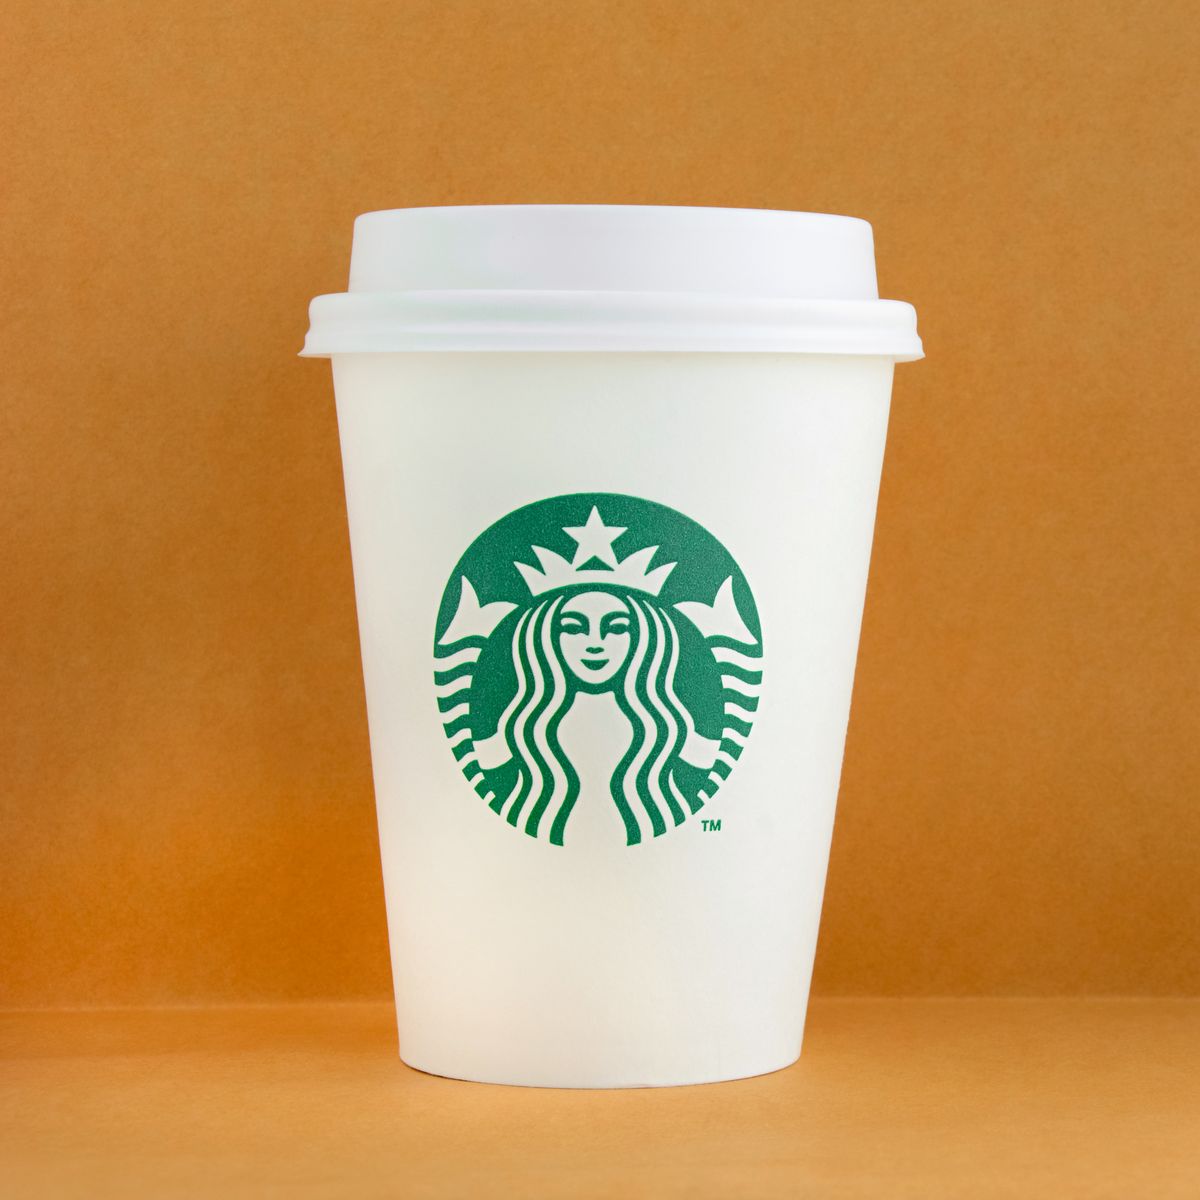 Starbucks paper coffee cup